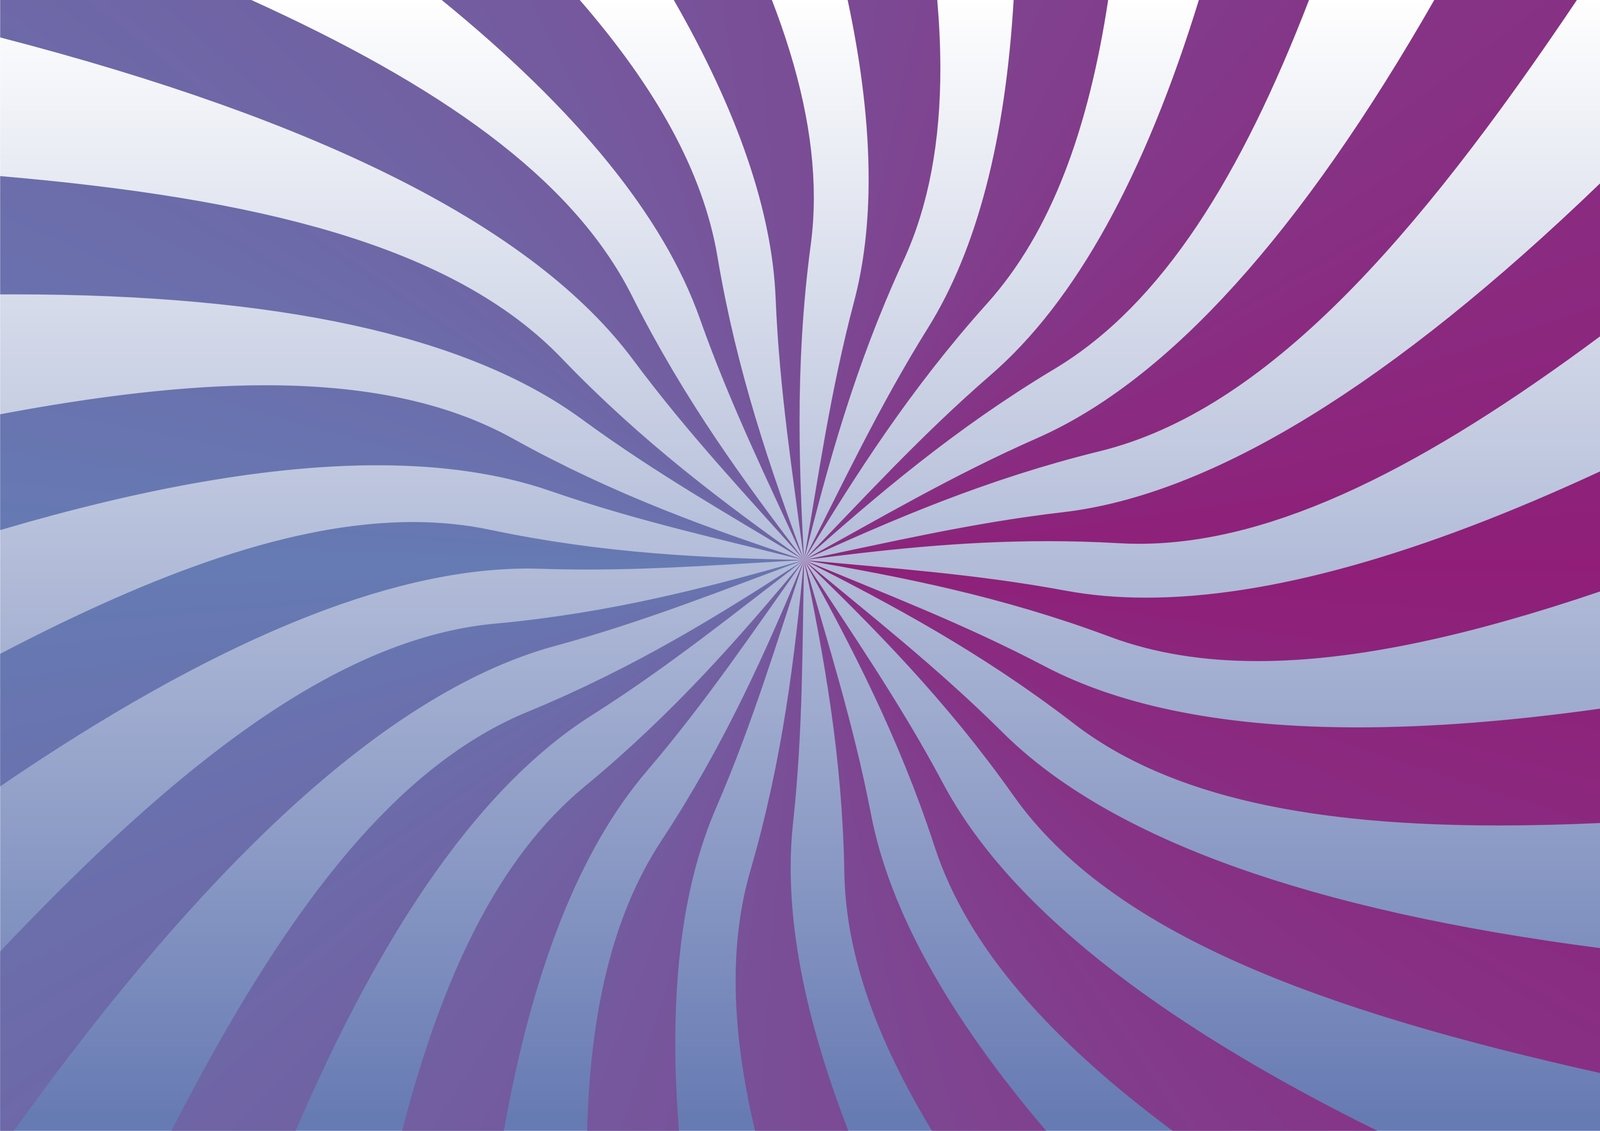 an abstract swirl pattern with blue and purple stripes